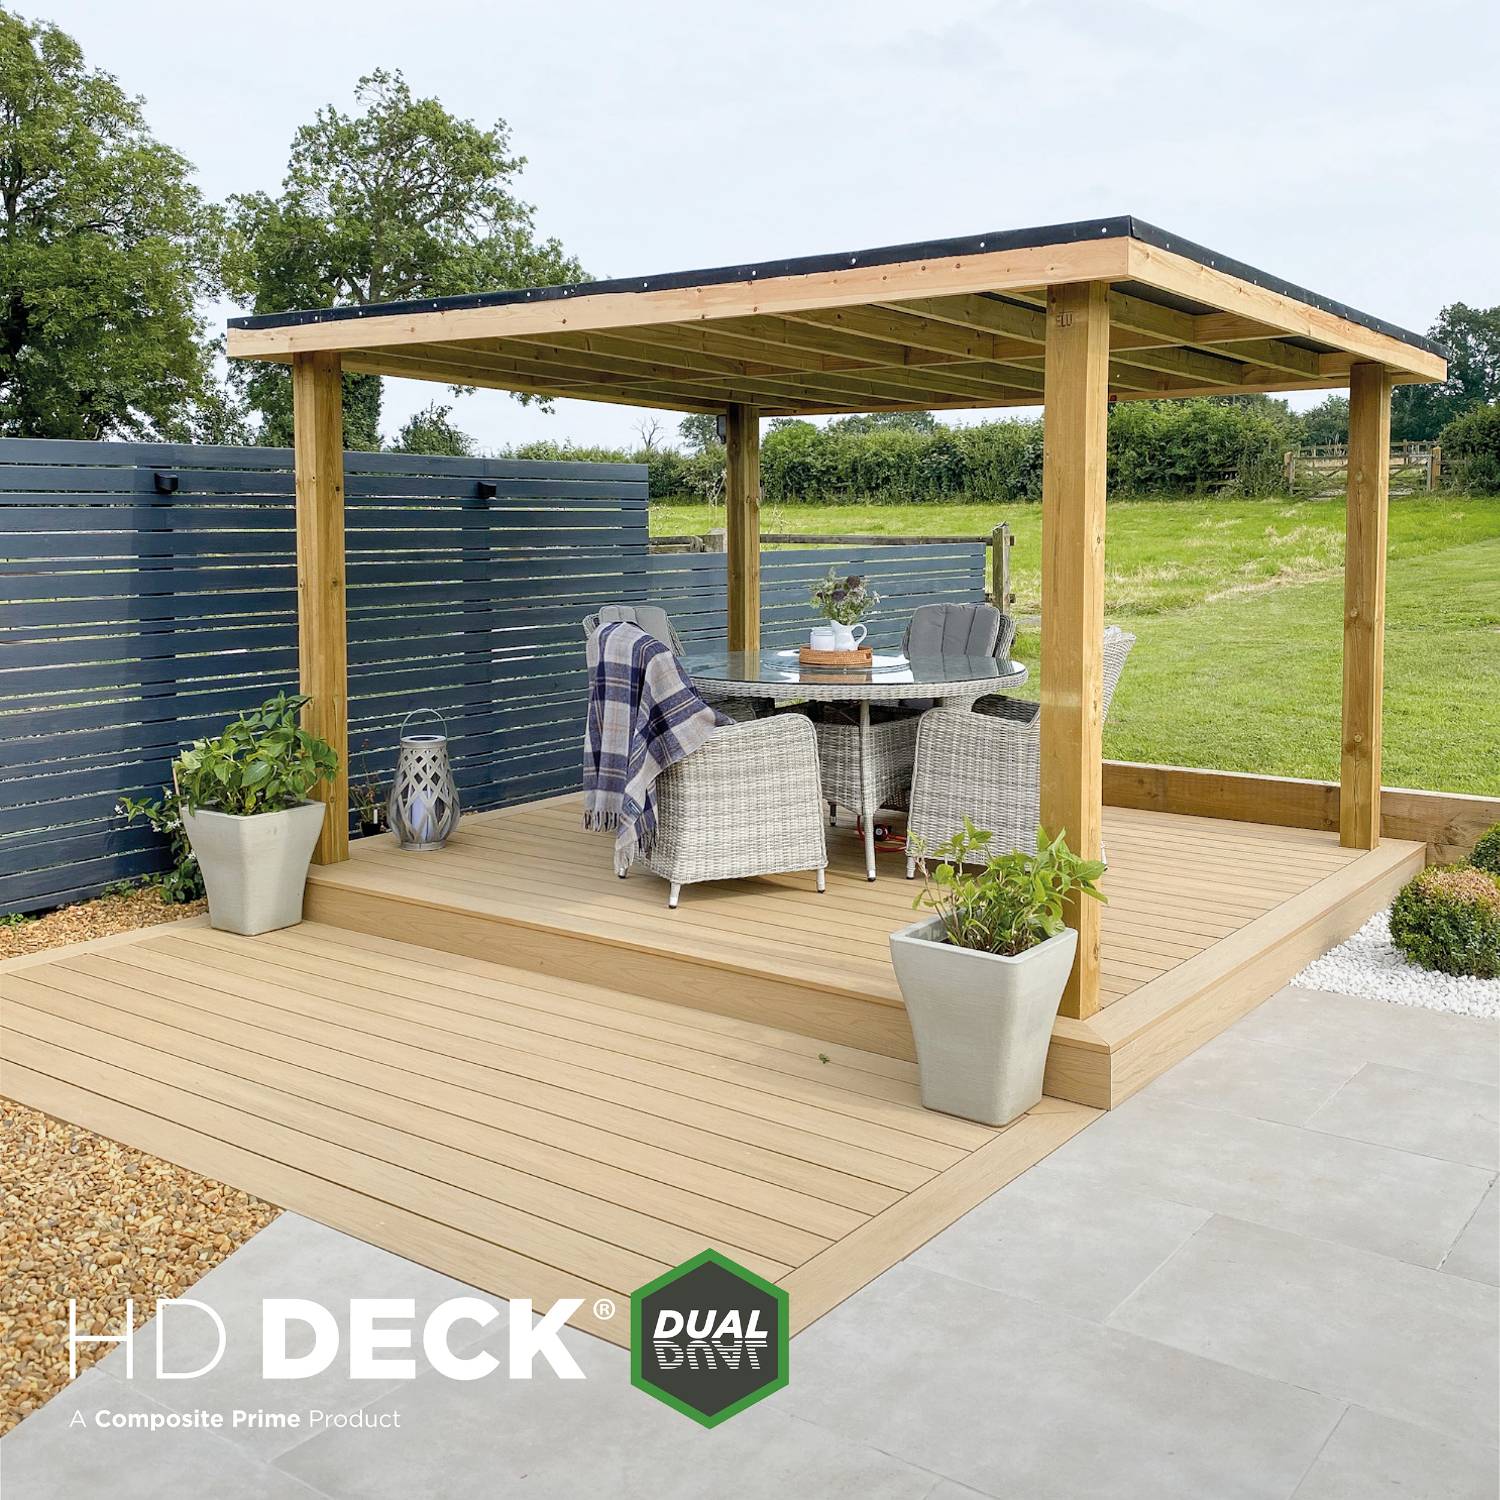 HD Deck® Dual | Capped Composite Decking System